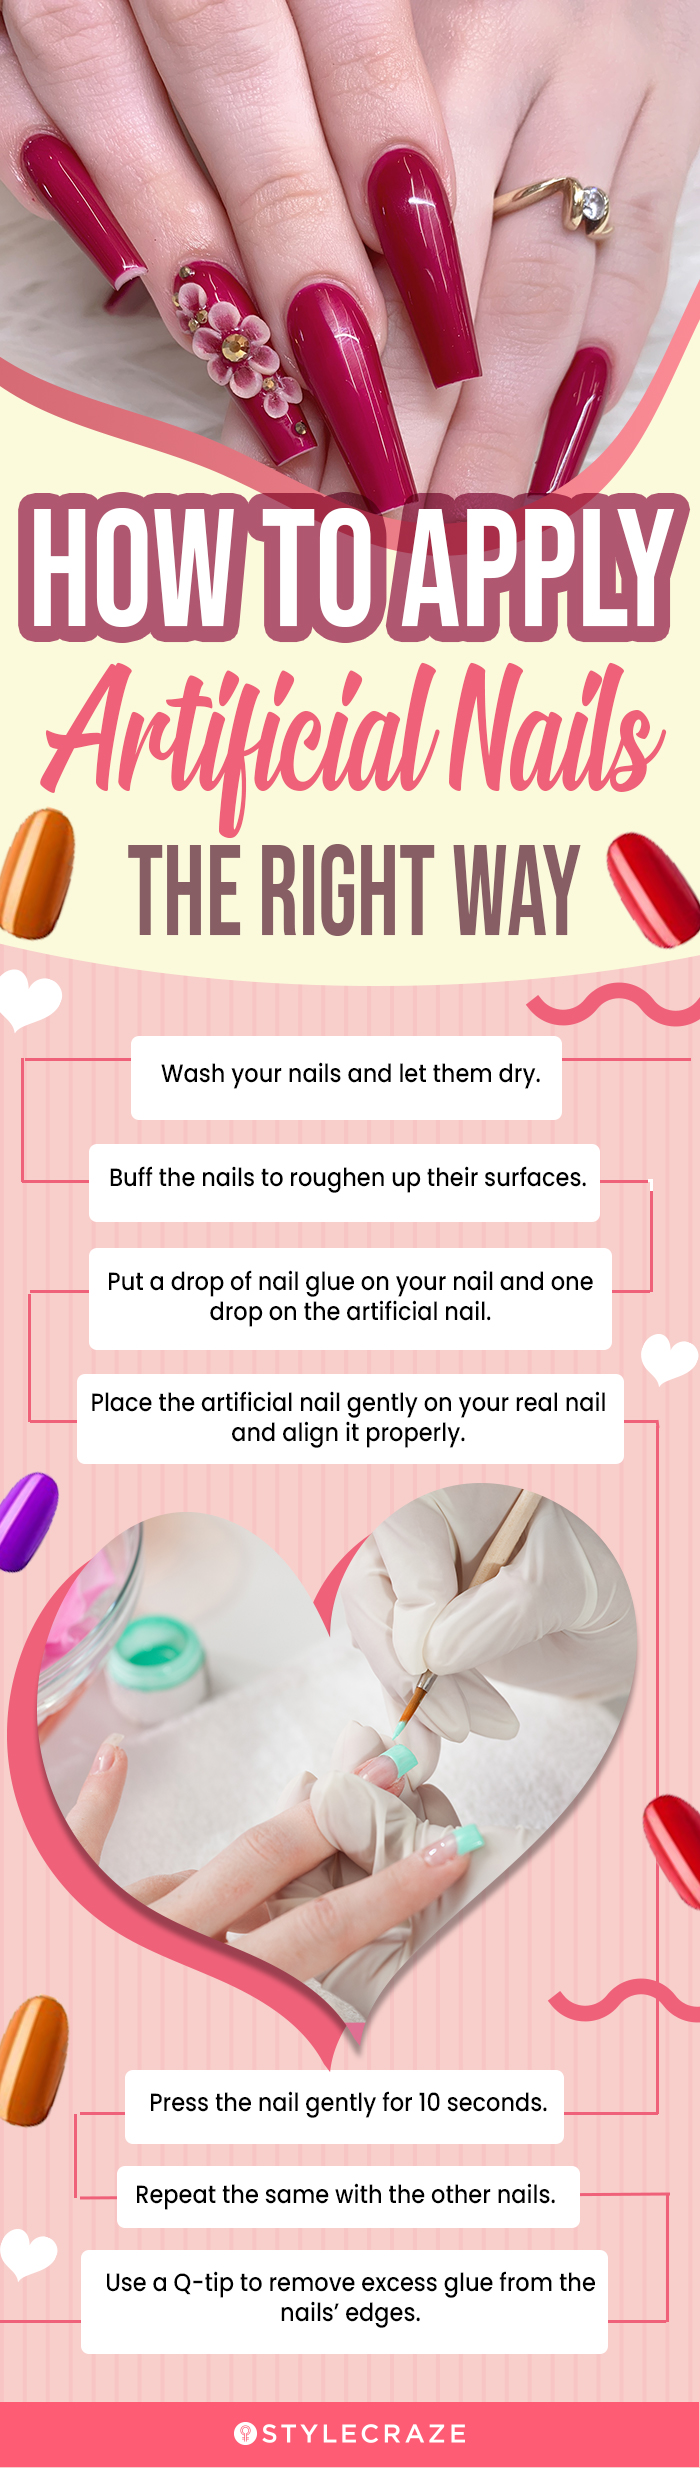 How To Apply Artificial Nails The Right Way(infographic)